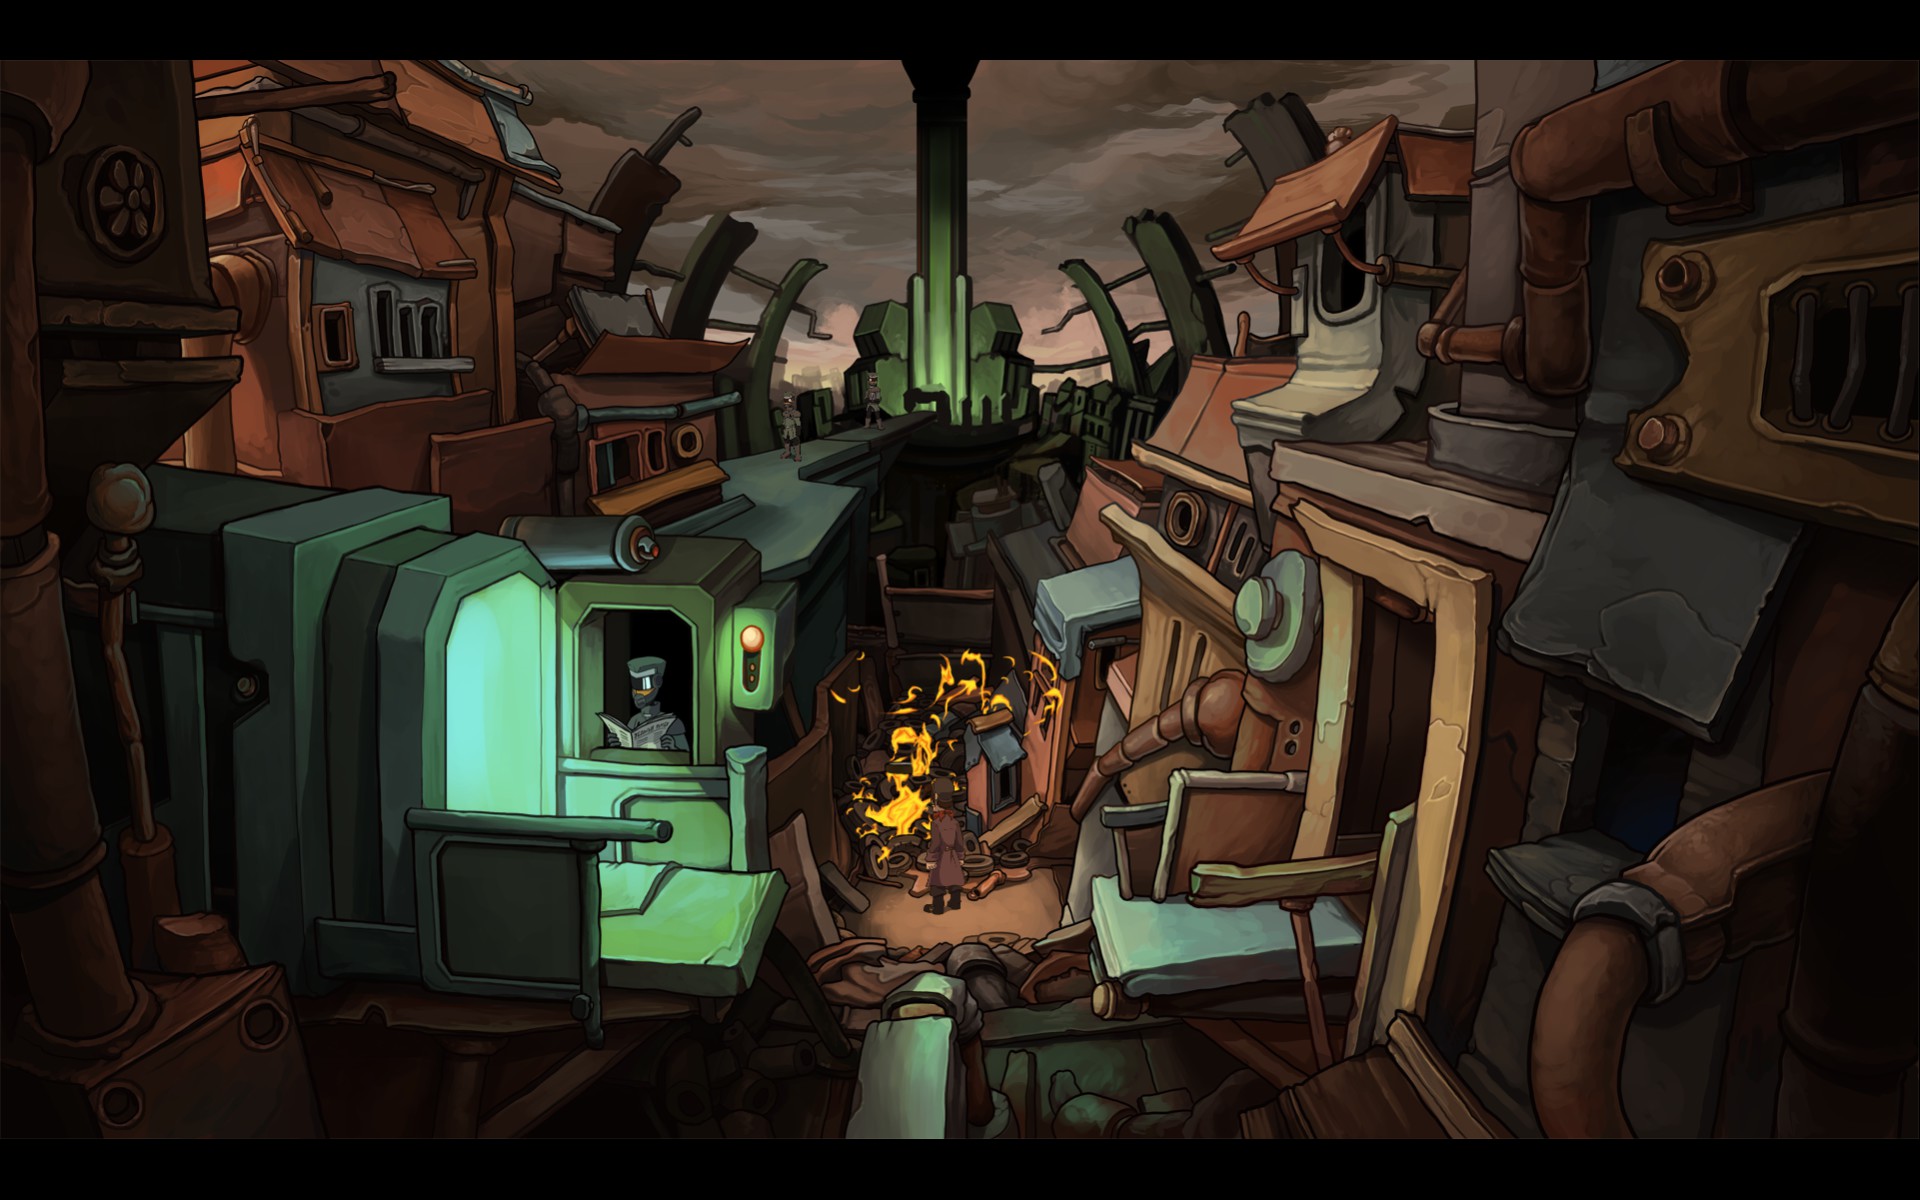 Chaos on Deponia.